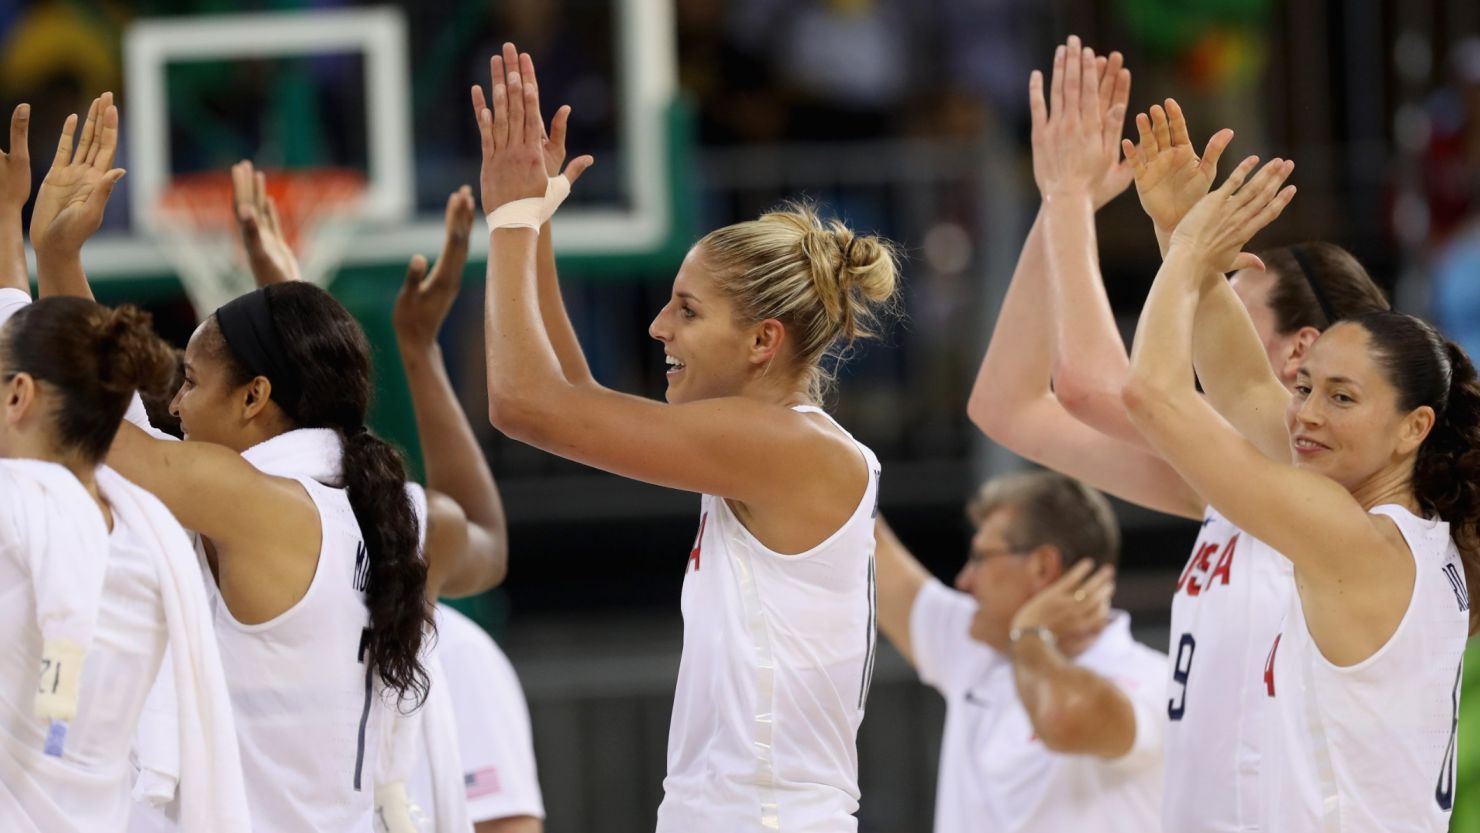 Elena Delle Donne (center) and the rest of Team USA celebrate their 110-84 win over Serbia in the Rio 2016 Olympic Games.